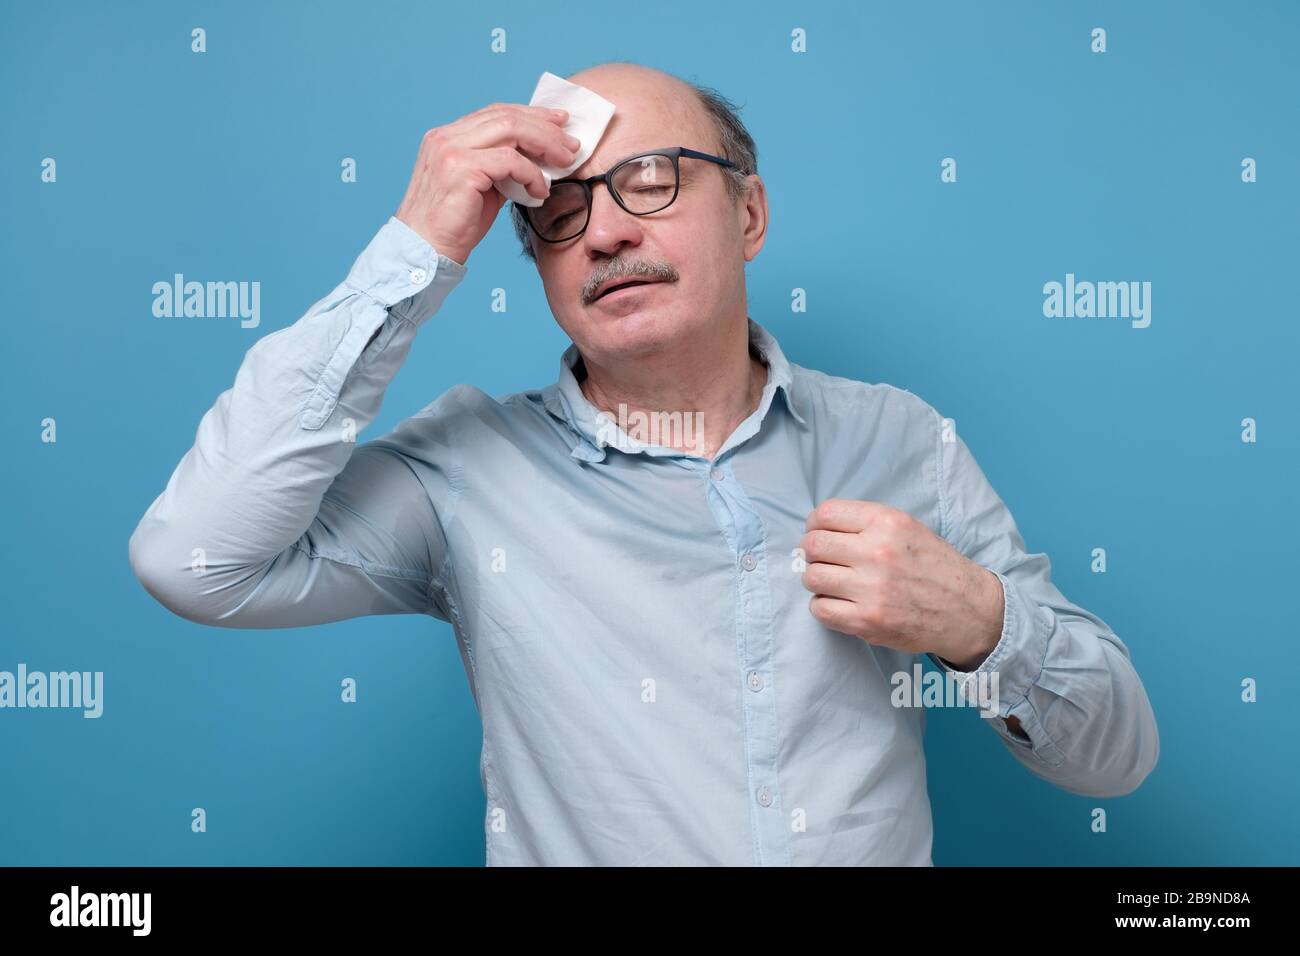 Senior employee sweating in a warm office wiping a forehead Stock Photo